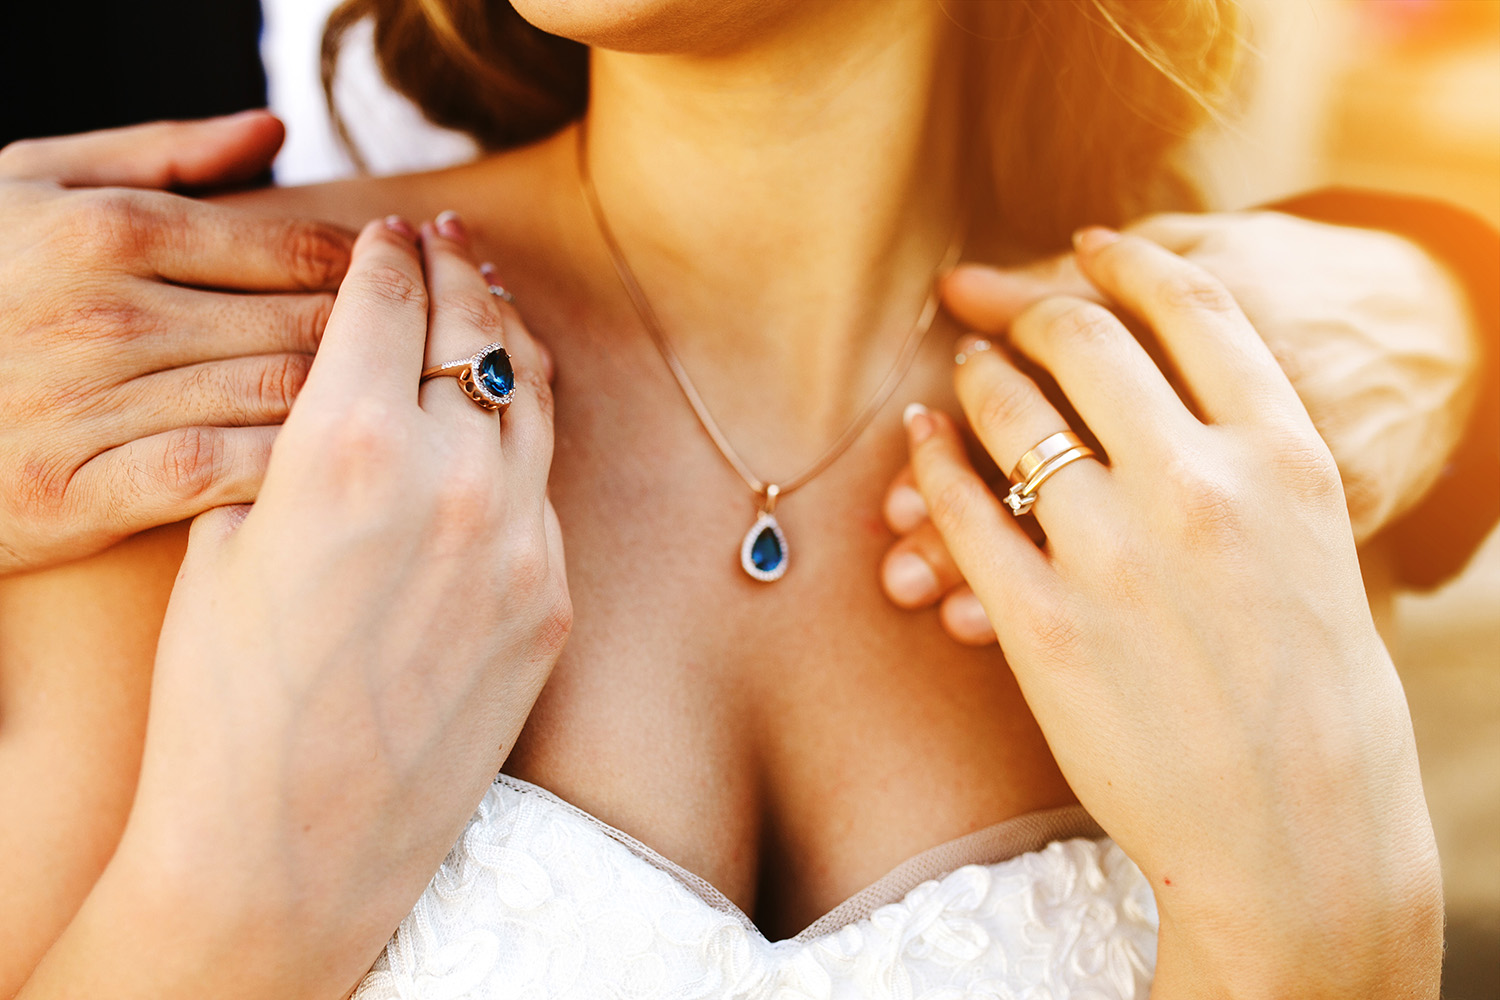 Why you should be insuring your Jewelry